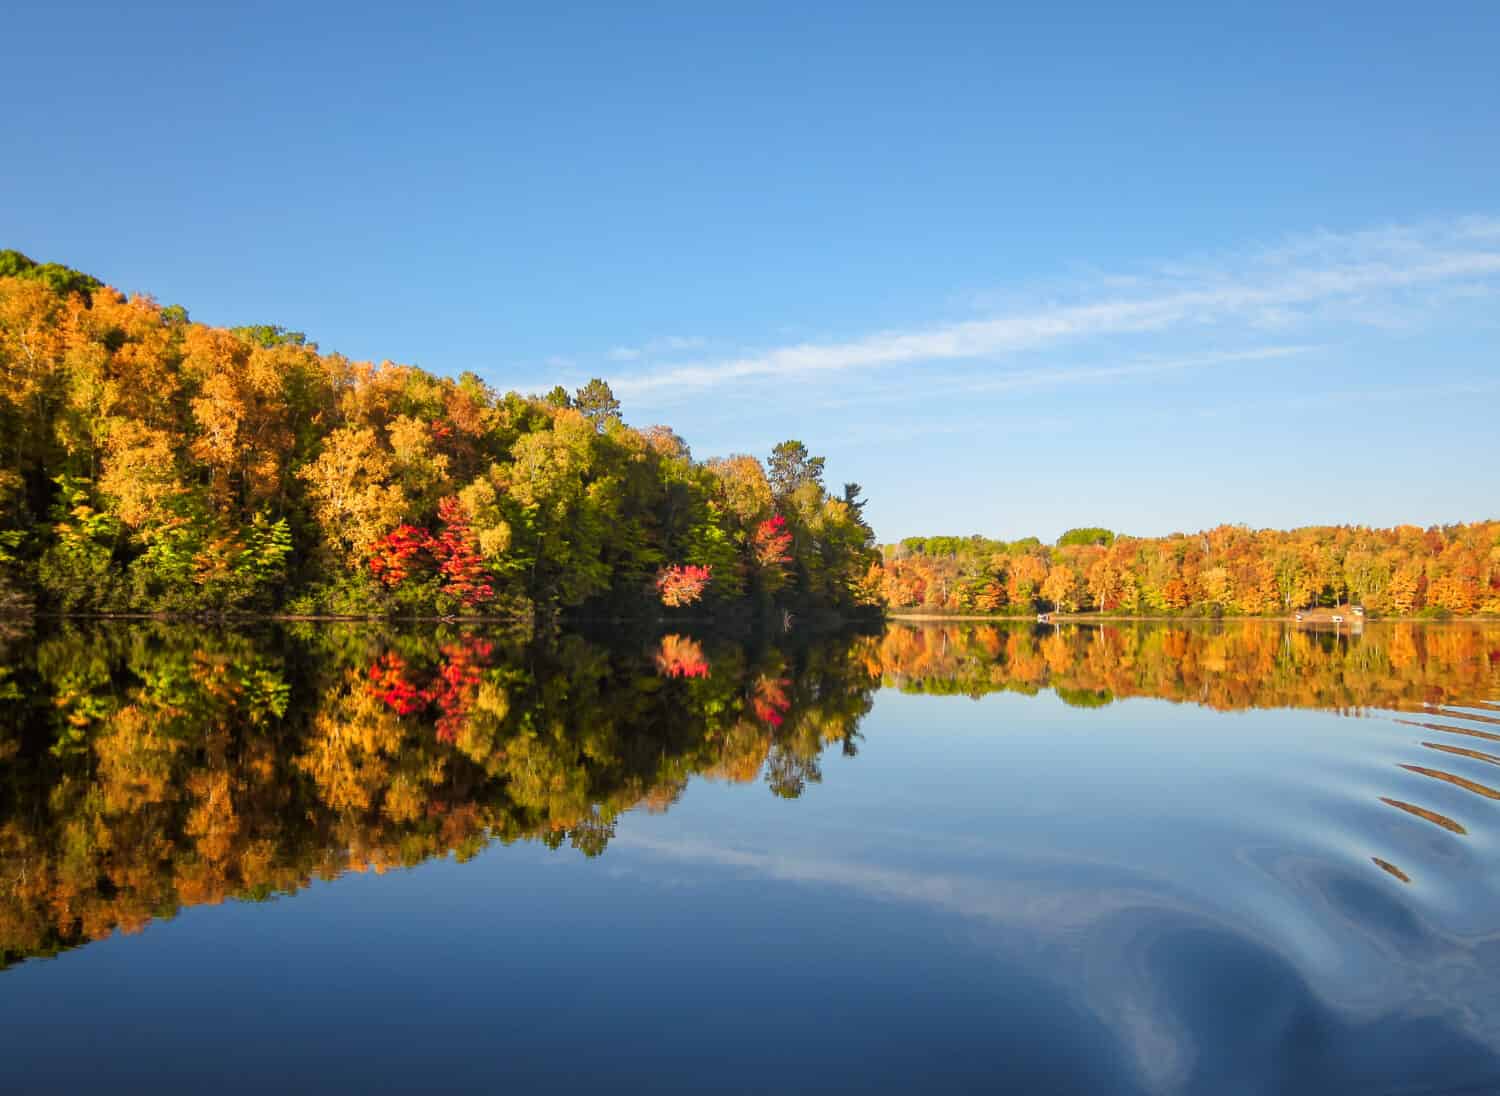 Fall colors trees reflection blue lake waters. Horizontal autumn landscape. No people.